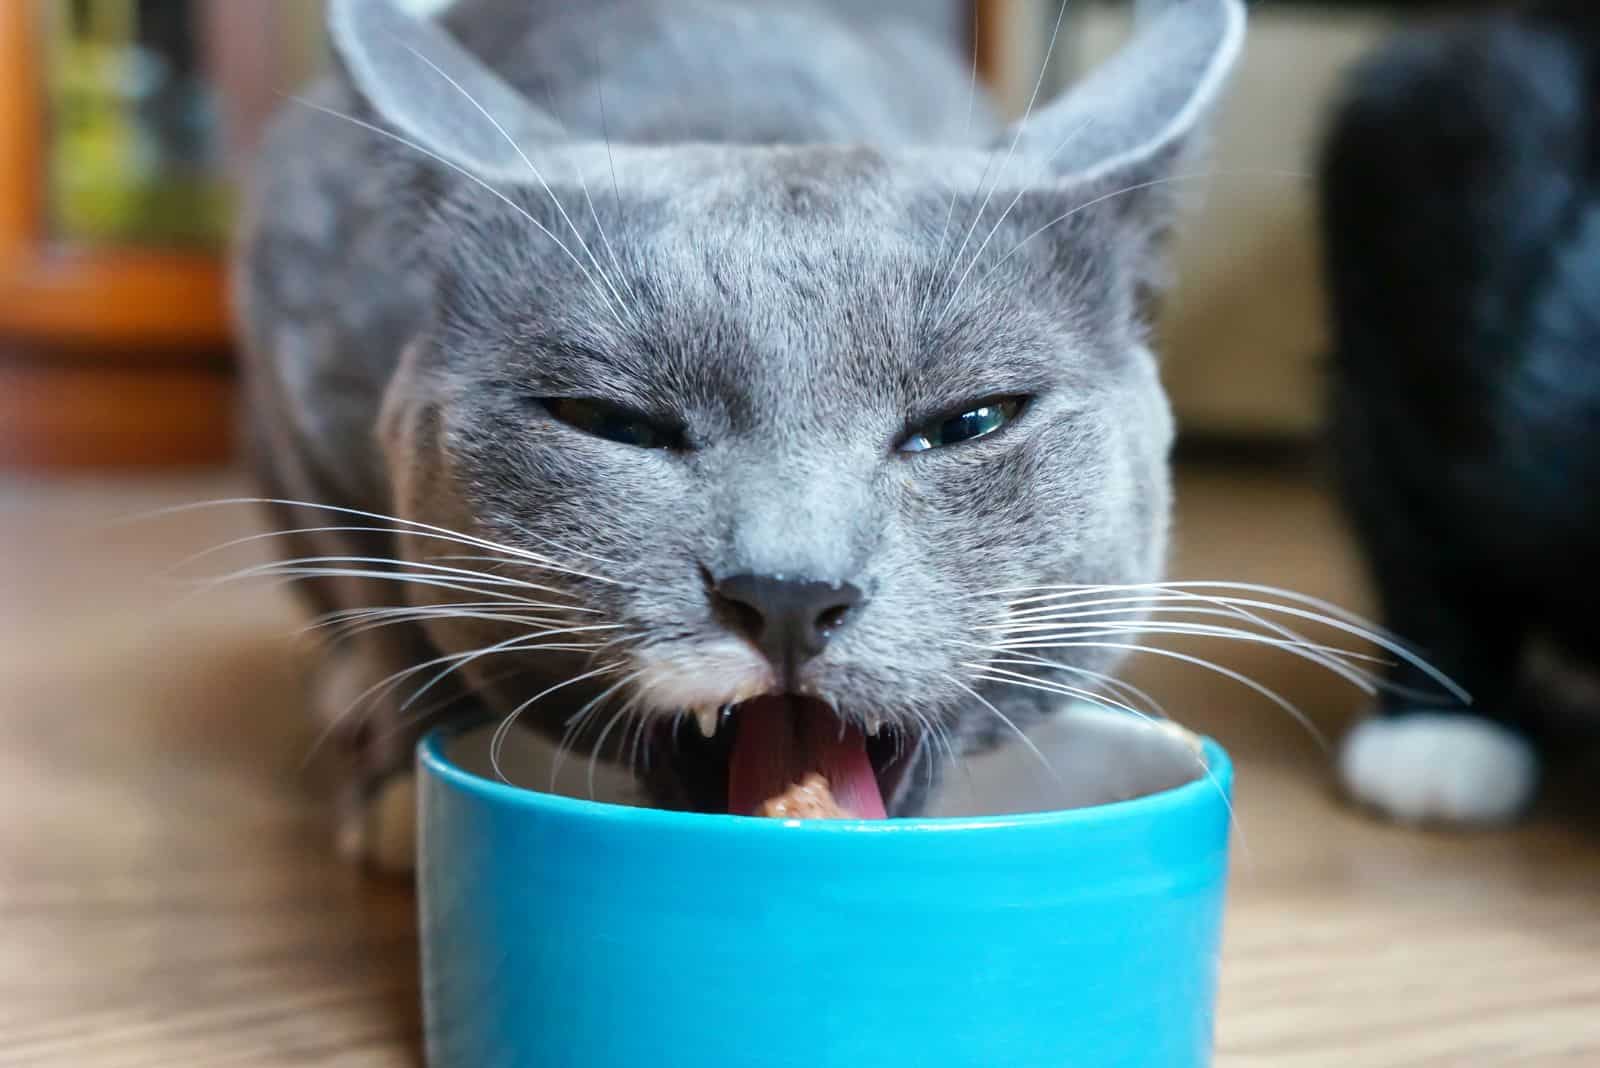 photo of a grey cat eating from a blue food bowl